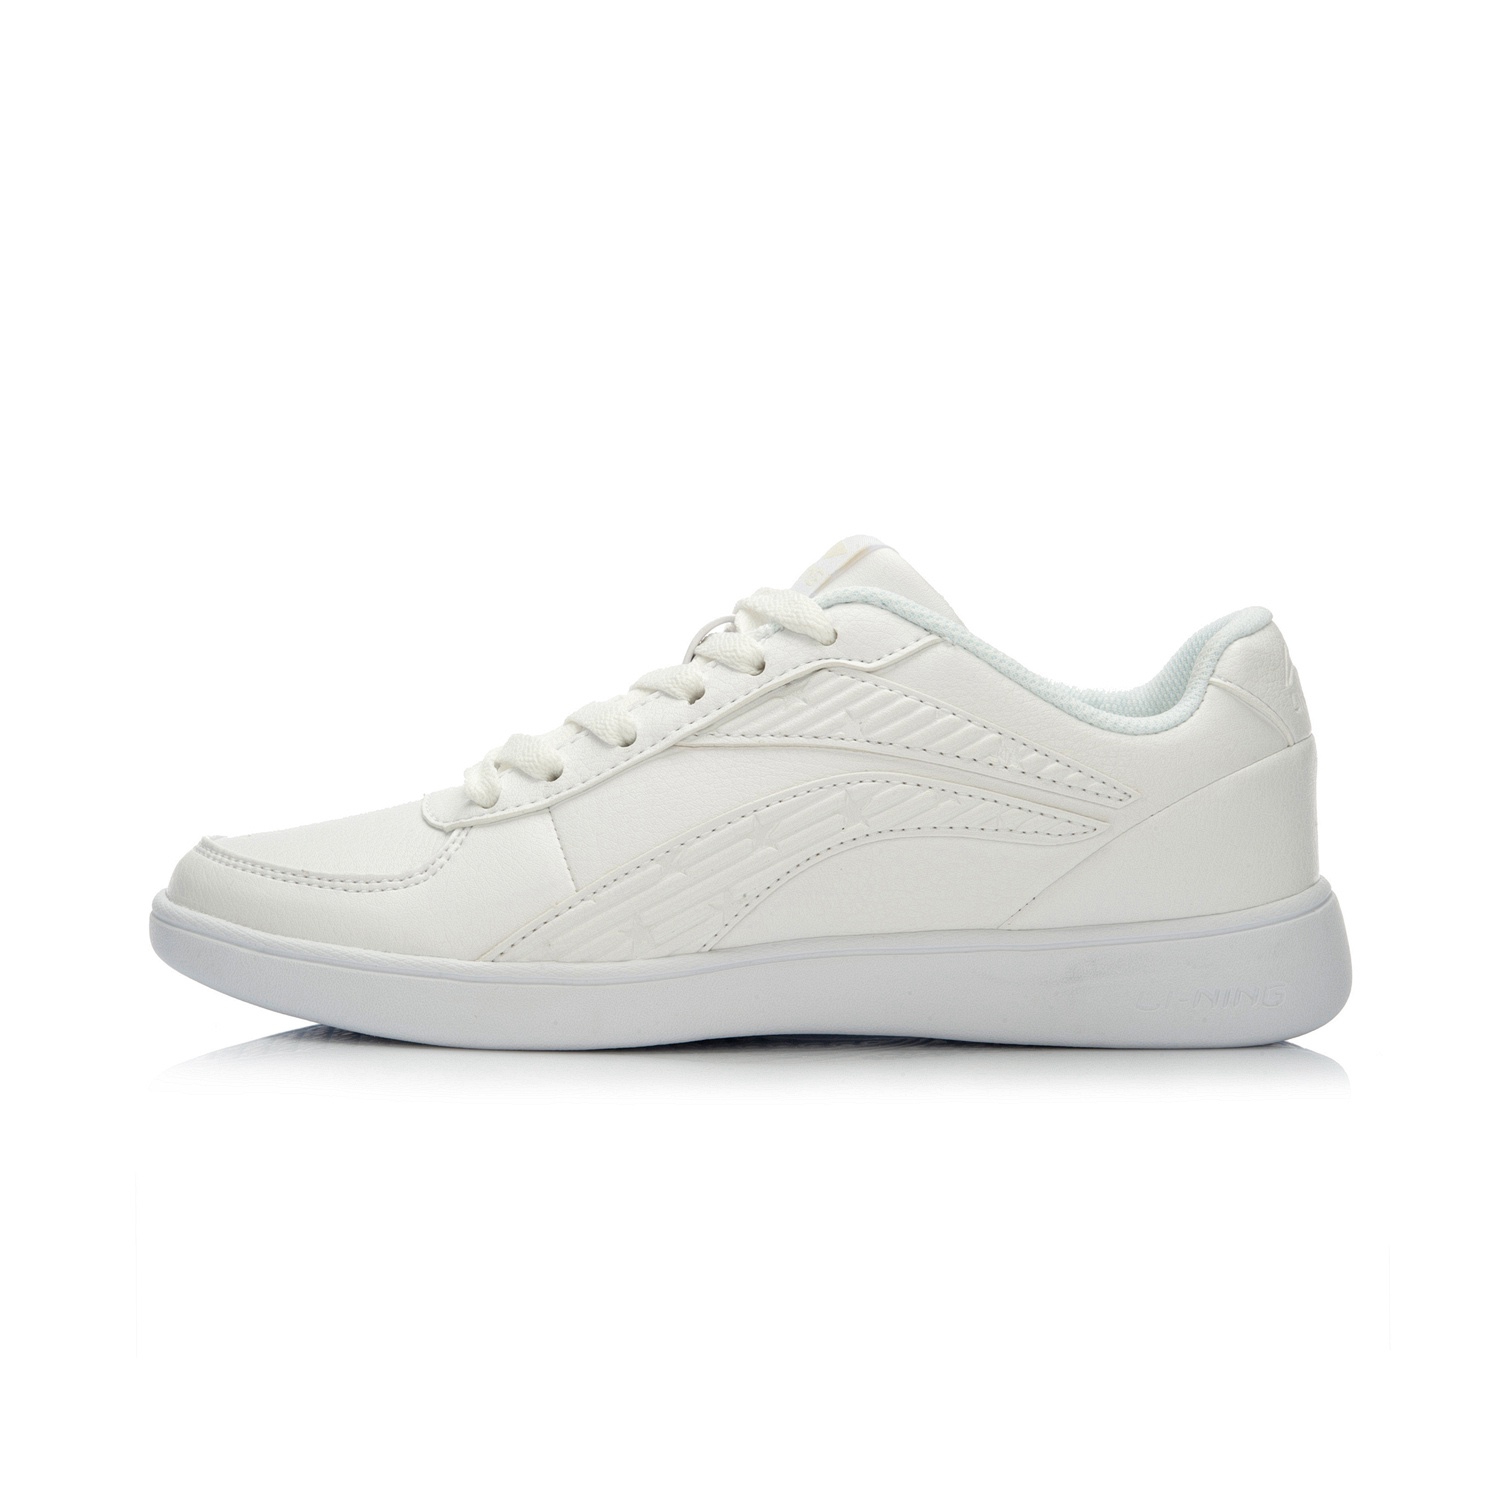 Li Ning LINING Casual Shoes Women's Shoes Superwave Lightweight Casual Board Shoes Small White Shoes Sports Shoes ALCK072